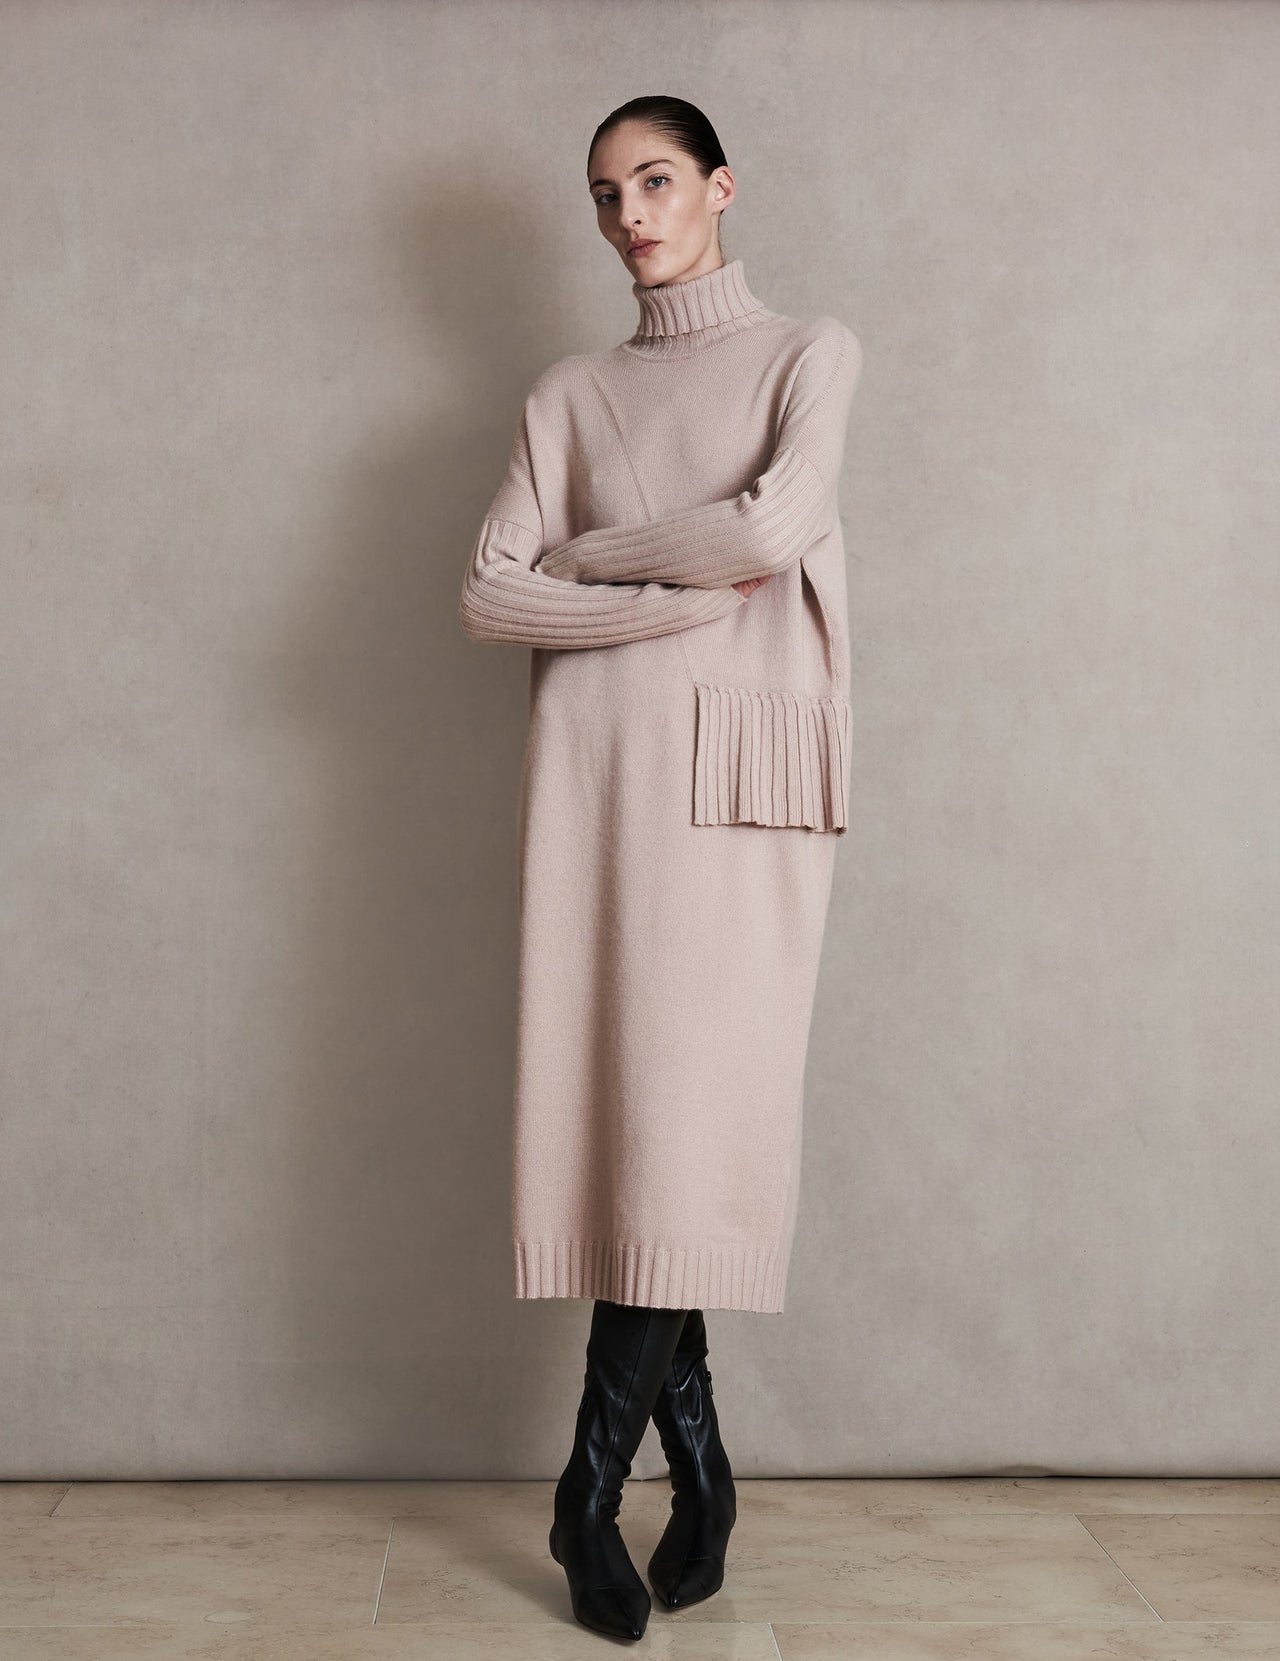  Blush Pink Roll Neck Pleated Cashmere Dress 